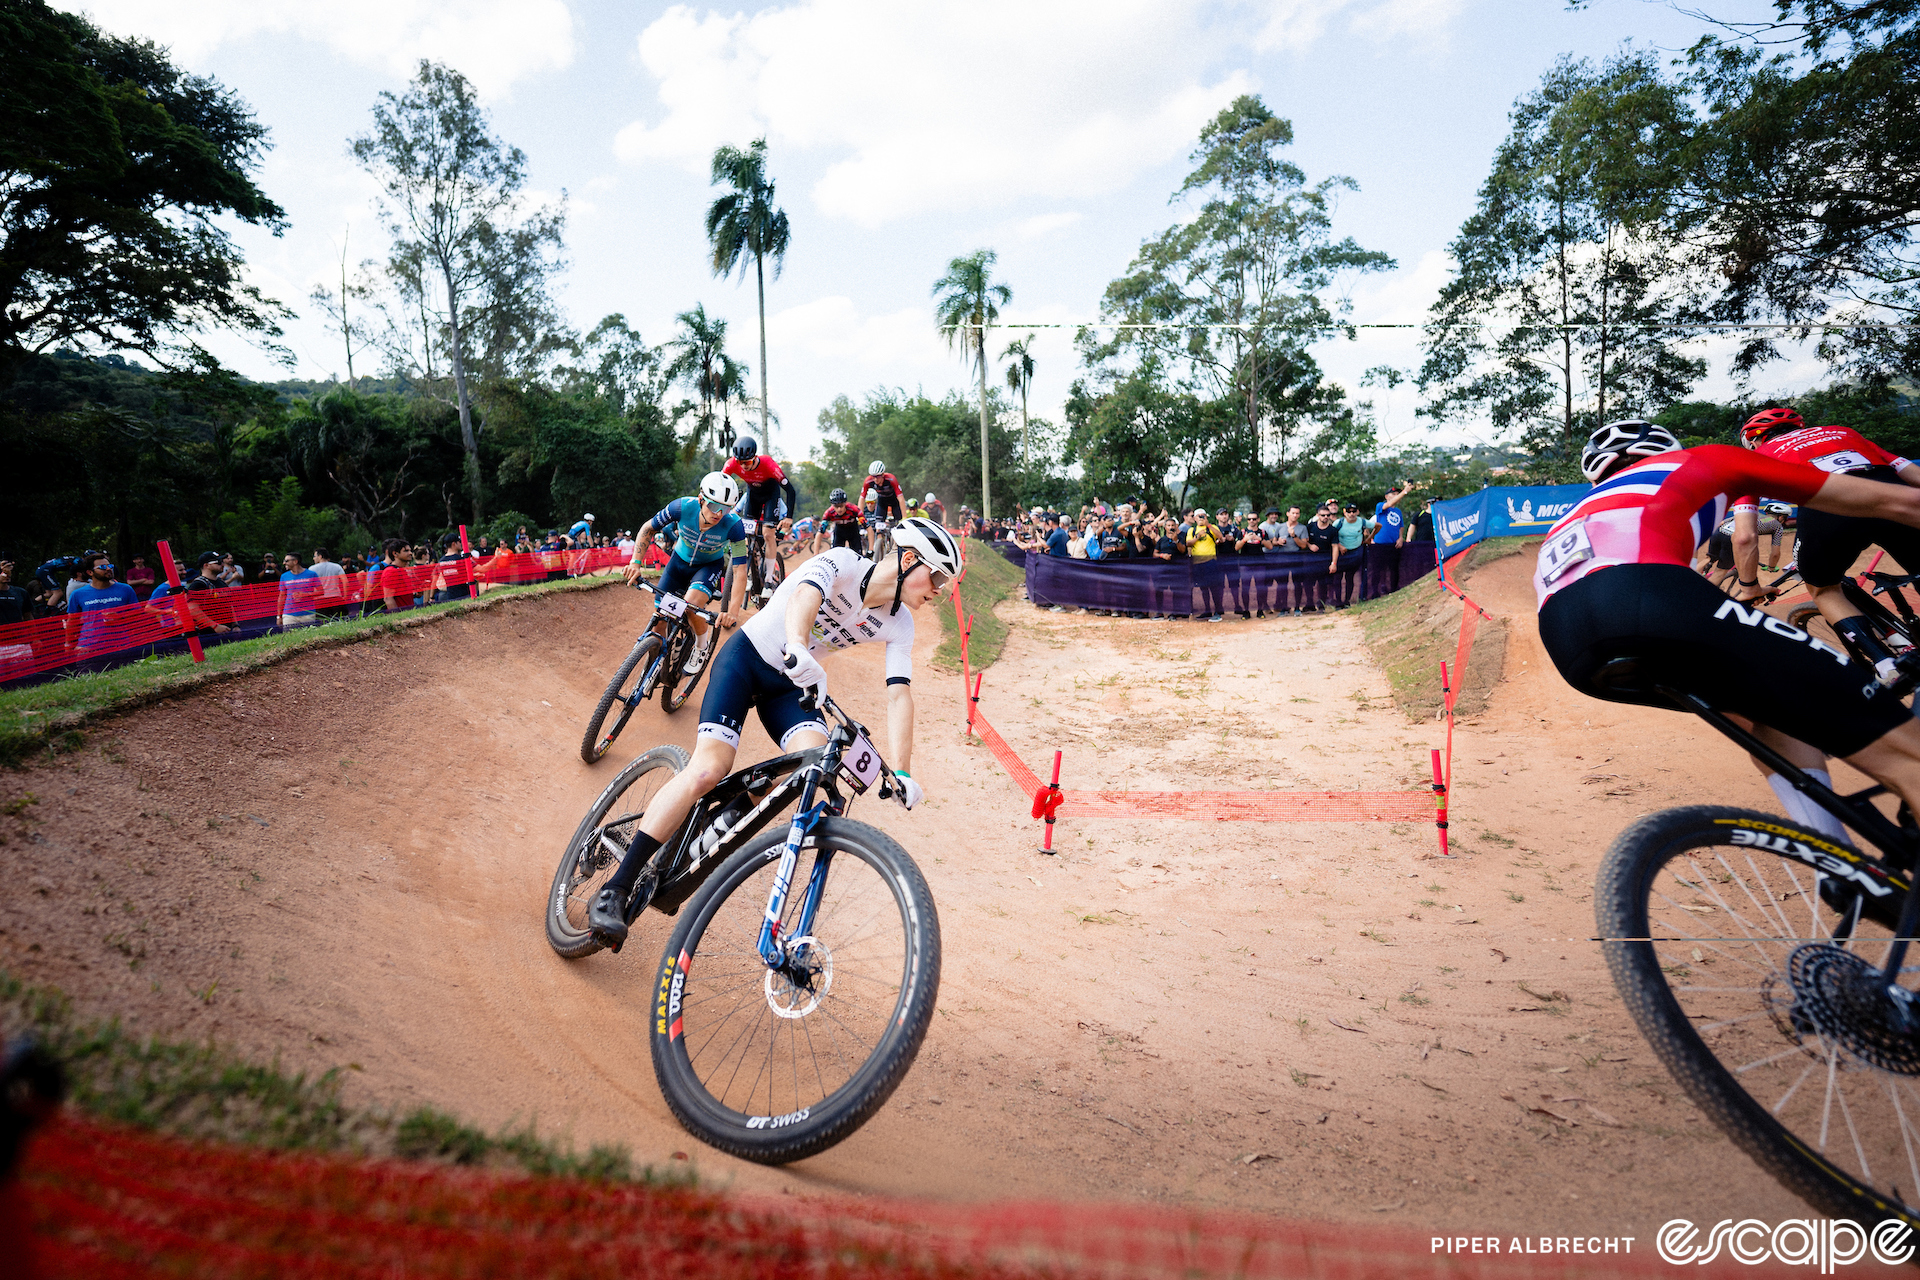 Riders navigate a pump track at the Mairiporã World Cup. The dirt is red clay and looks like a golf sand trap.